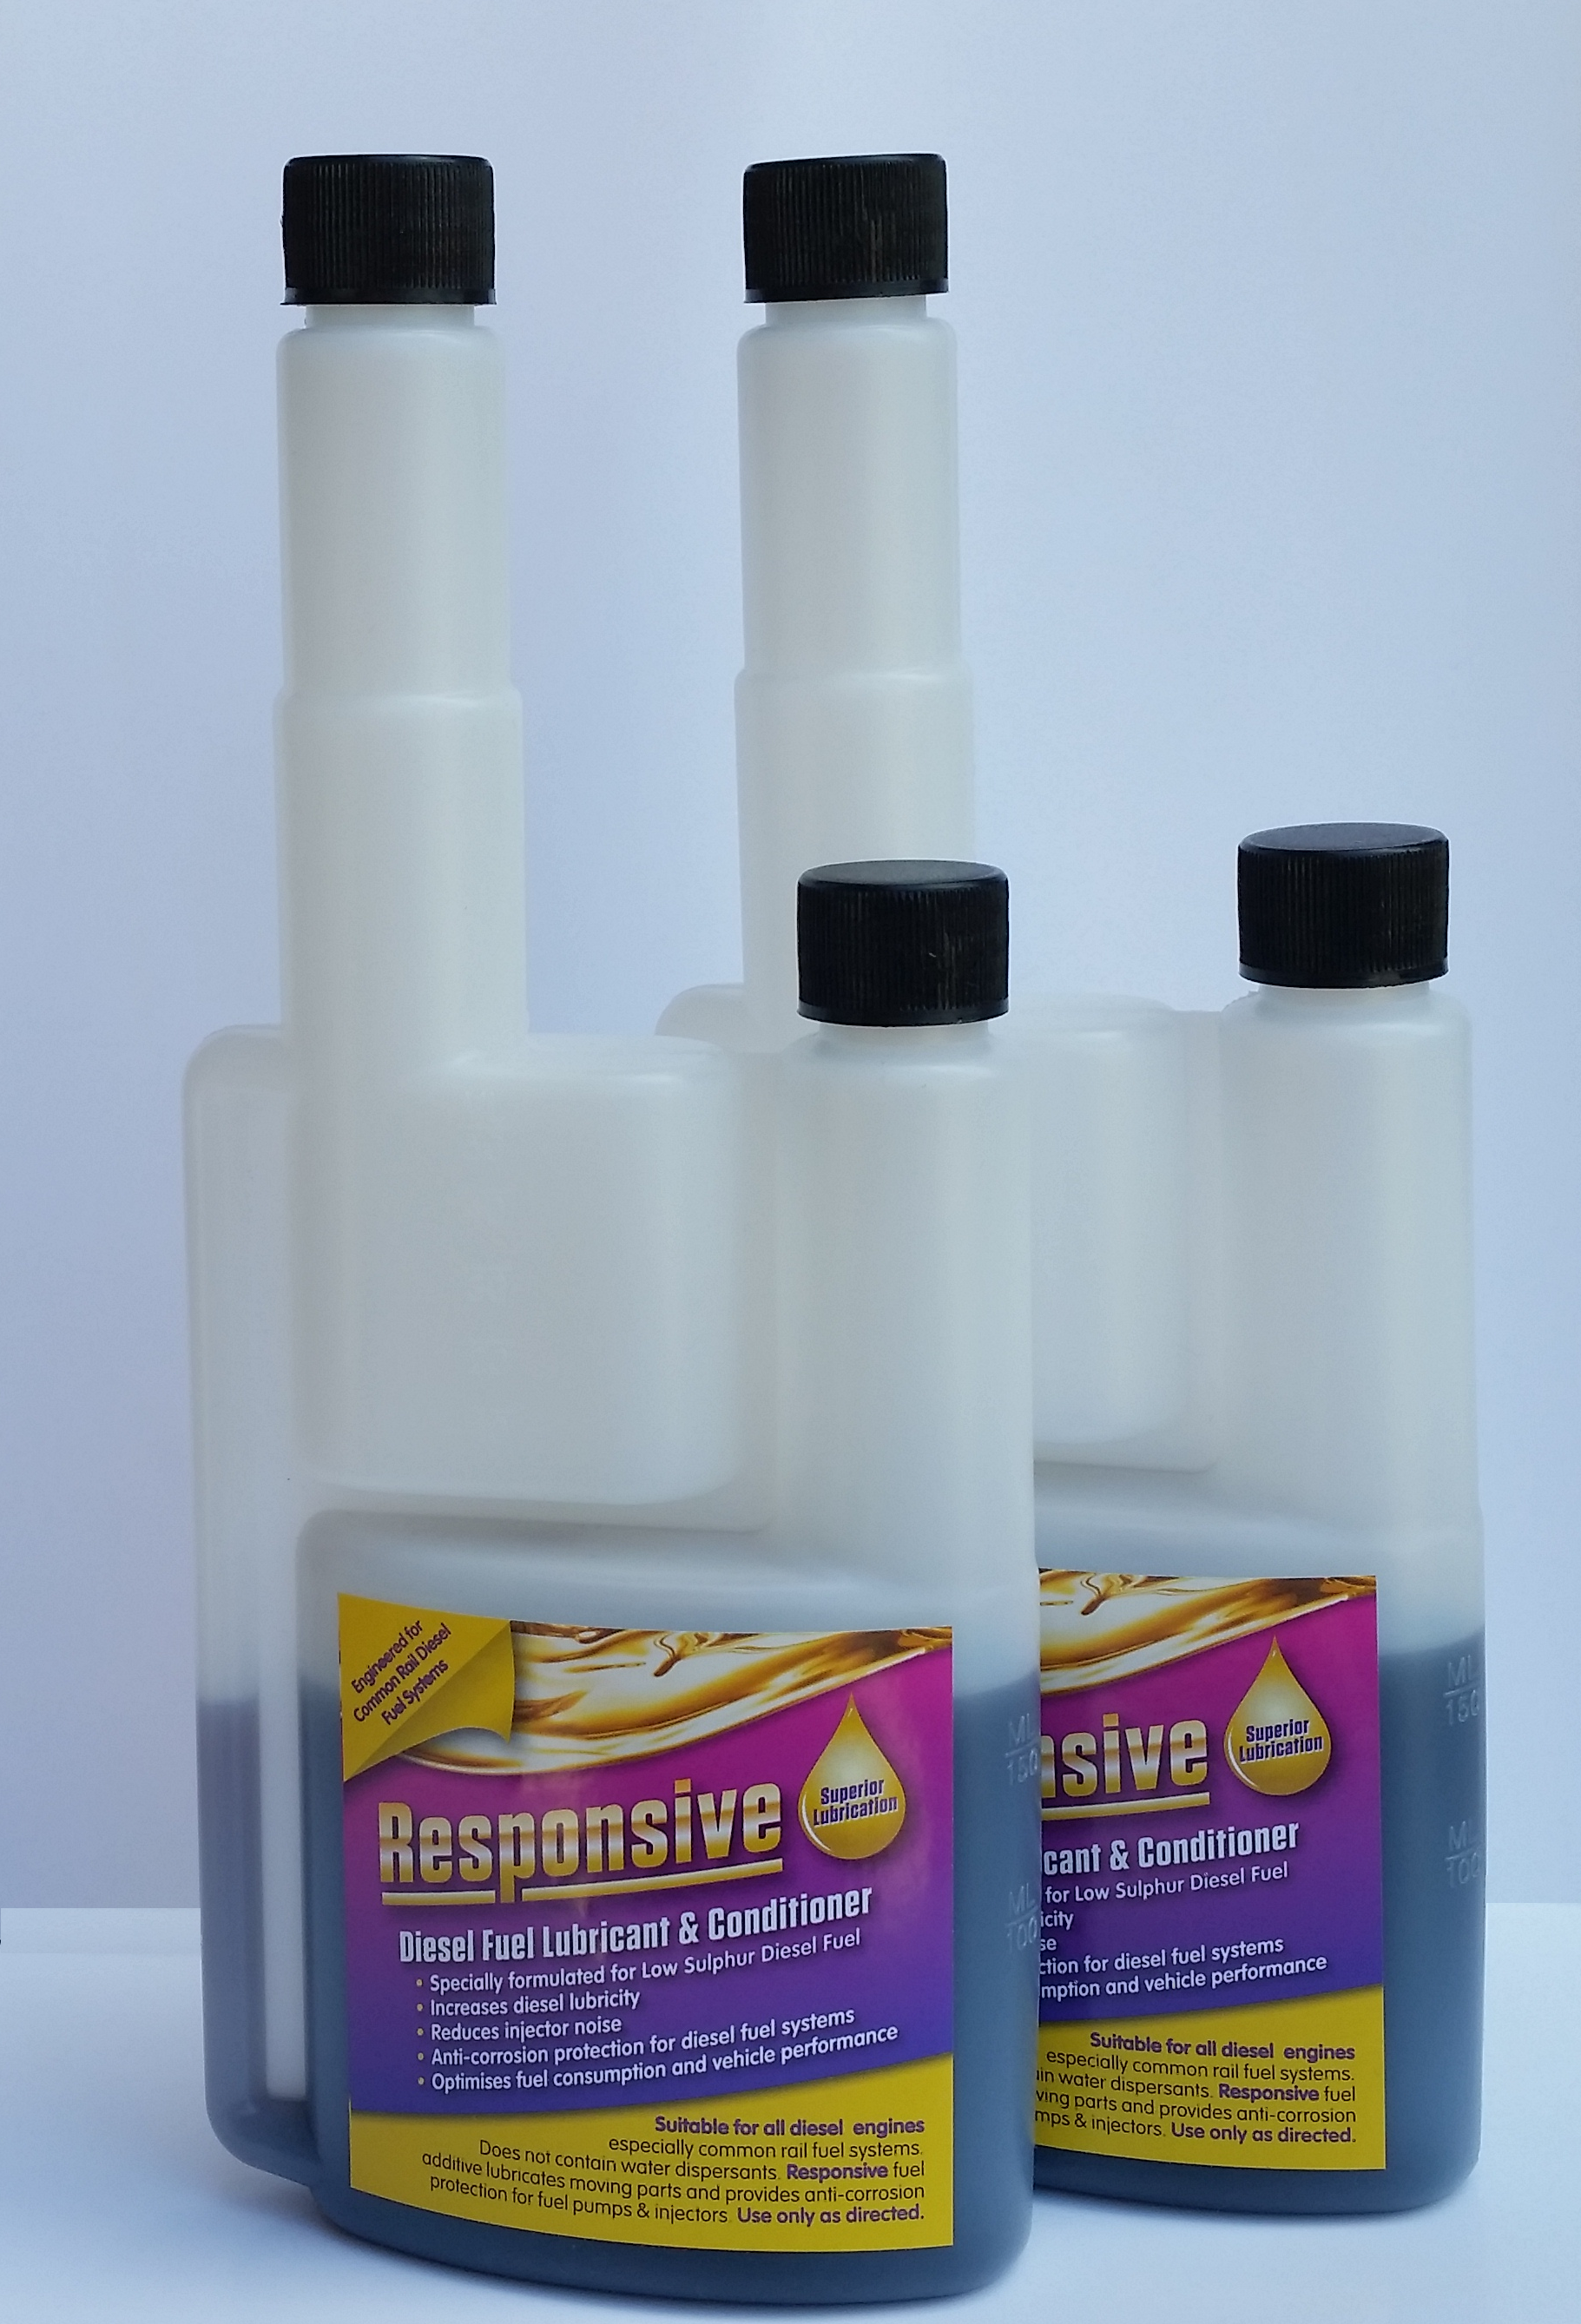 Fuel Additive Responsive Common Rail Diesel Lubricant And Conditioner Treatment - Made In Australia - Specialist Tools Australia